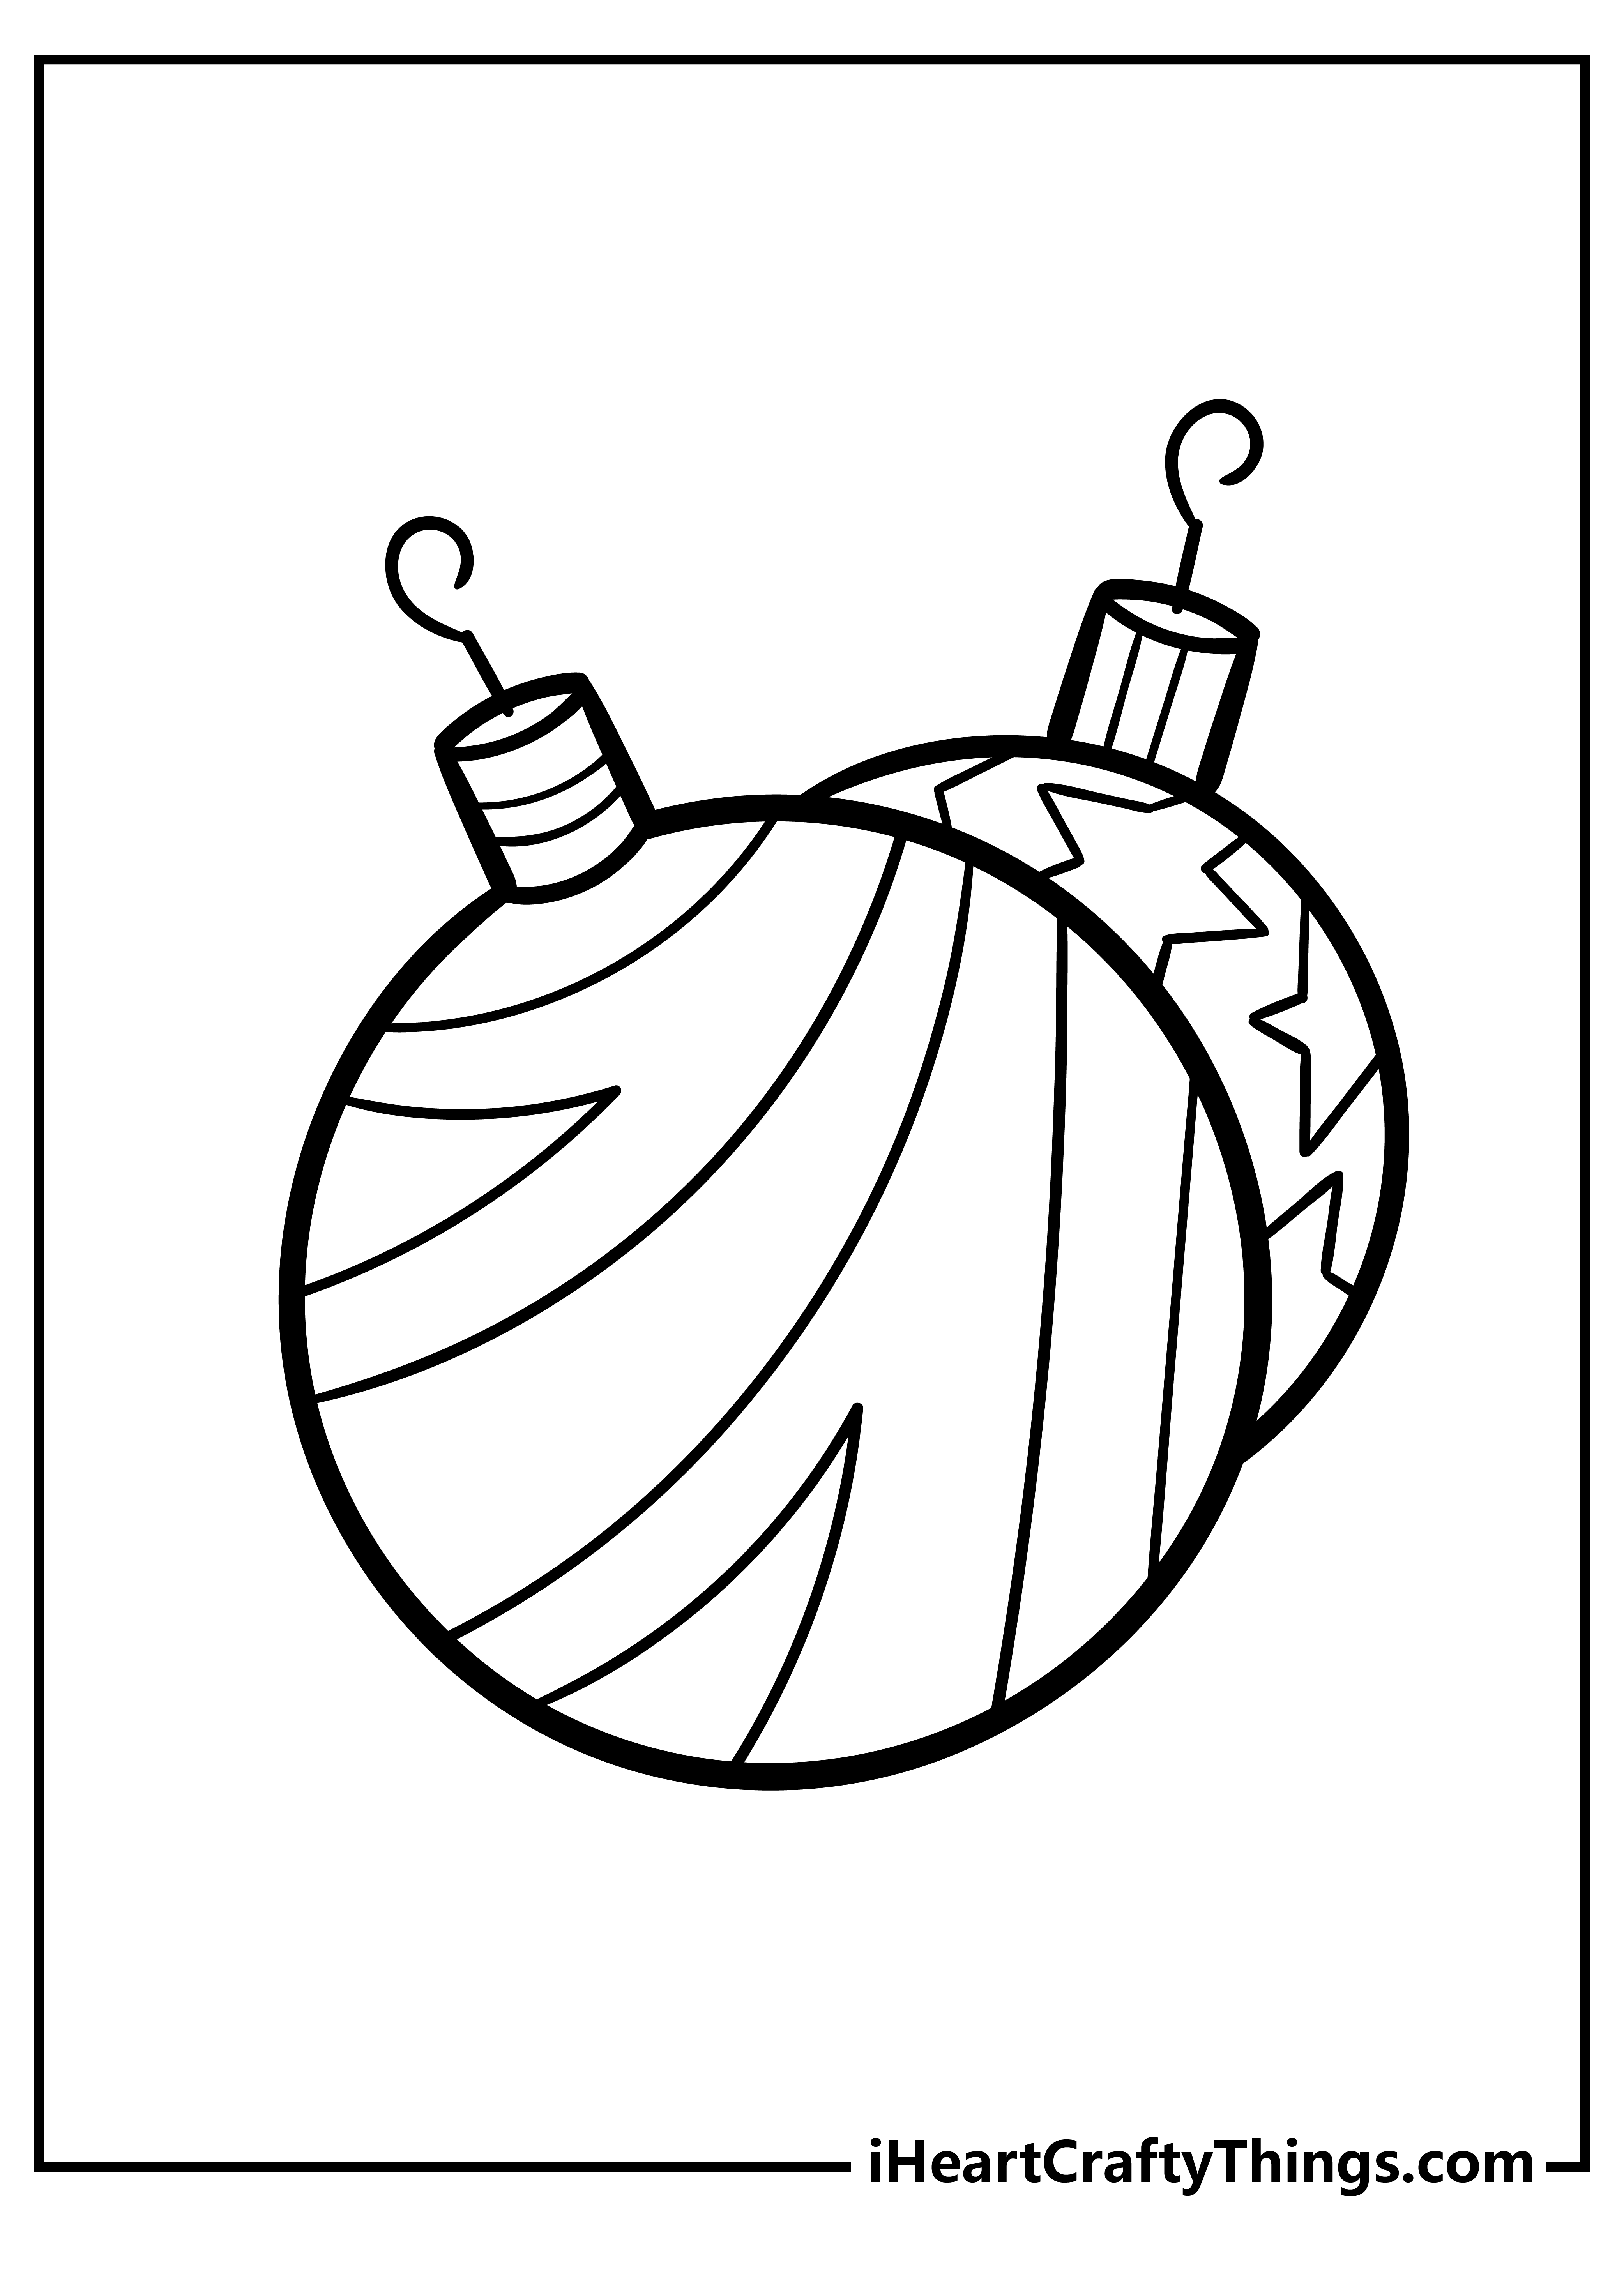 Christmas Ornament Coloring Book for adults free download